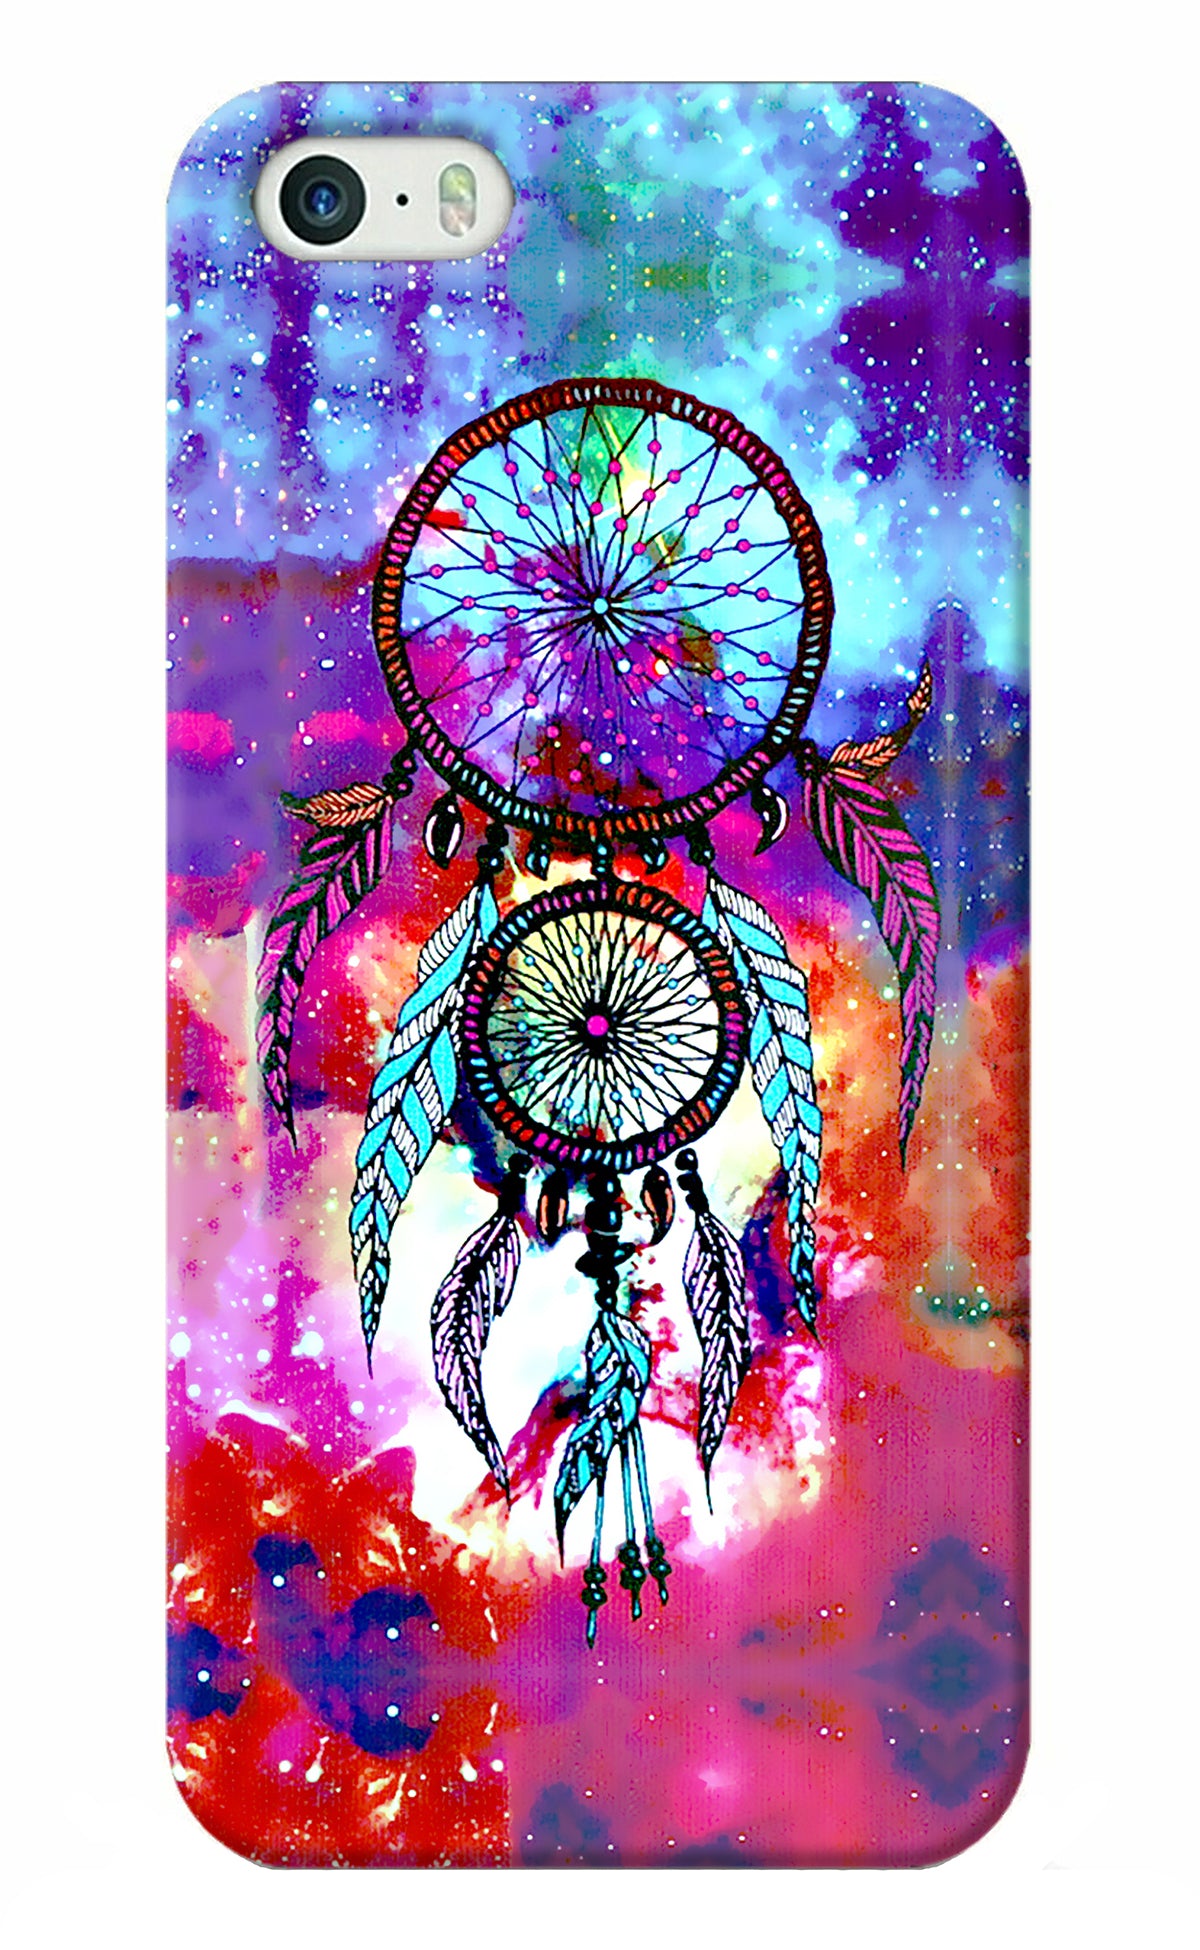 Dream Catcher Abstract iPhone 5/5s Back Cover